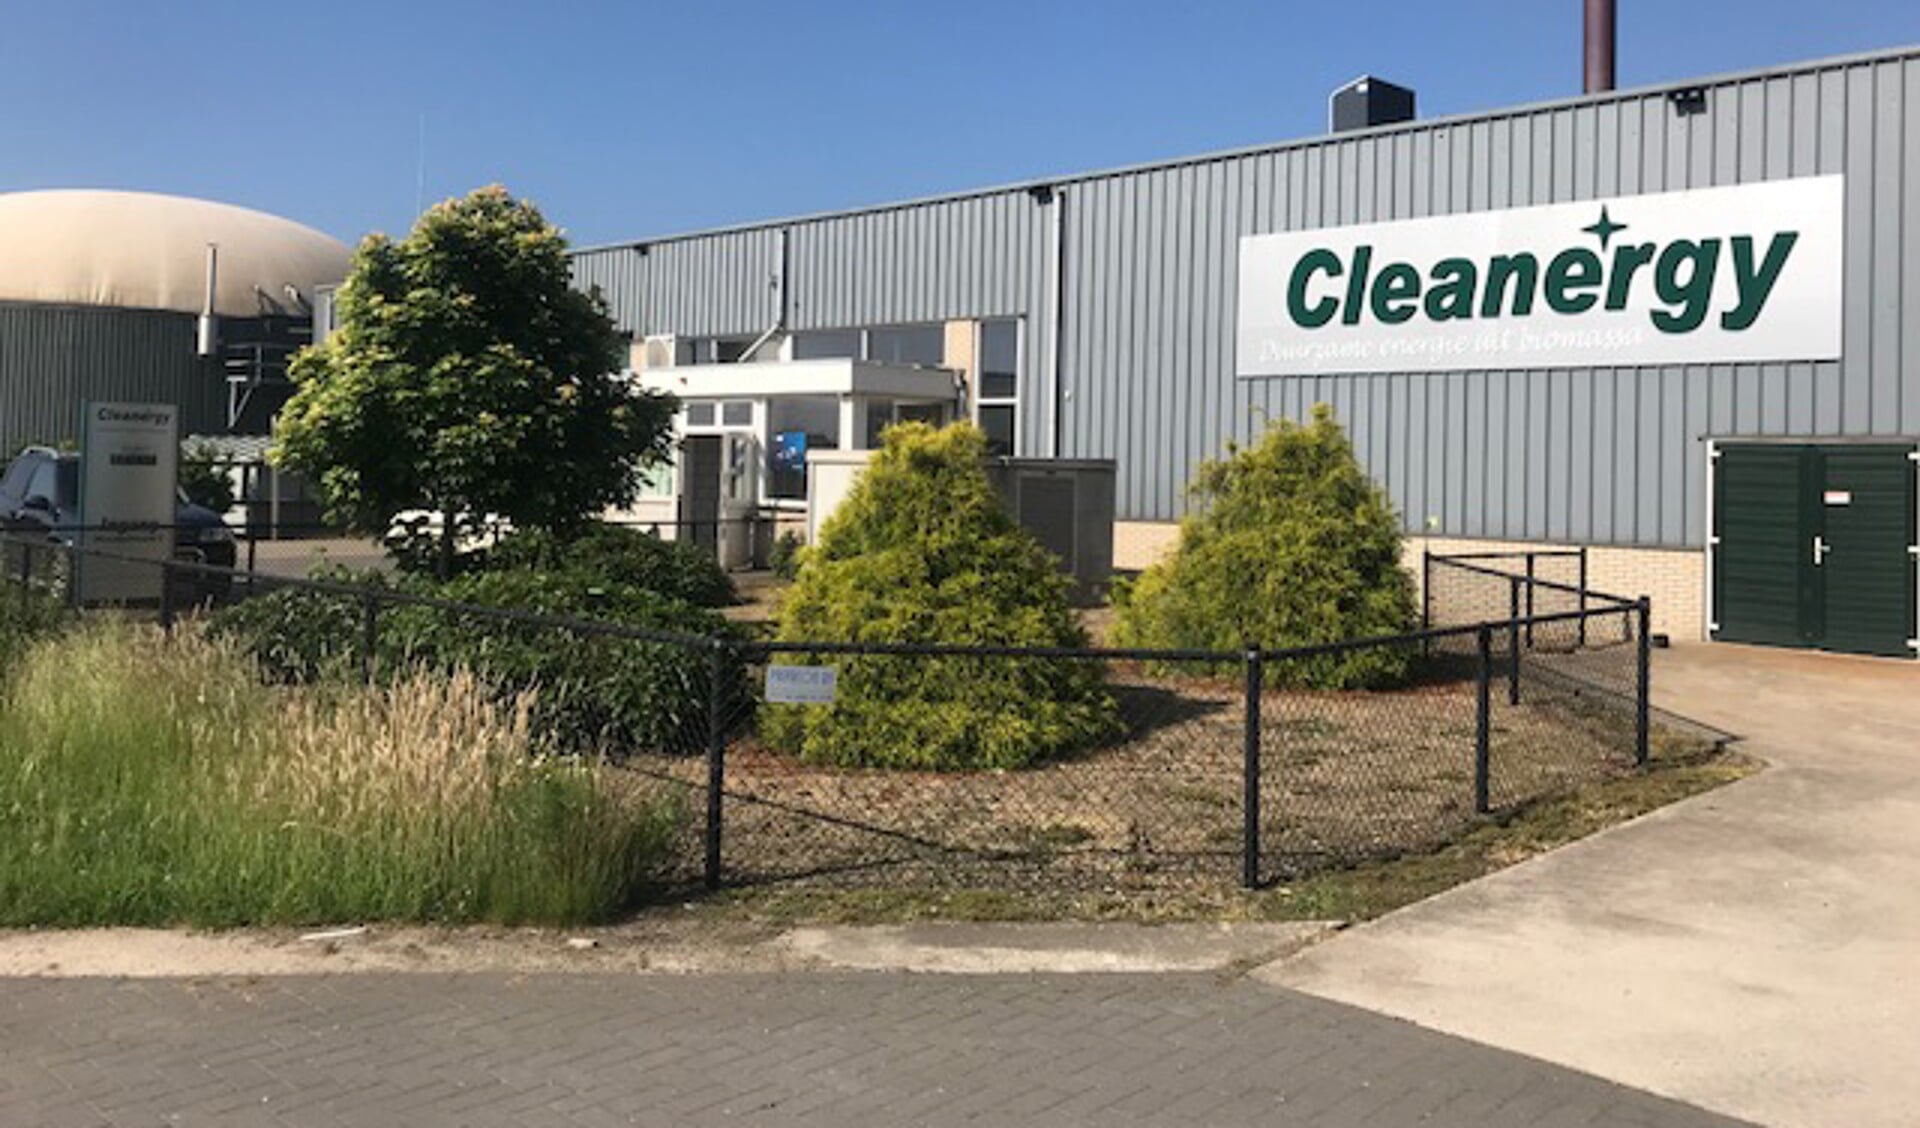 Cleanergy in Wanroij.